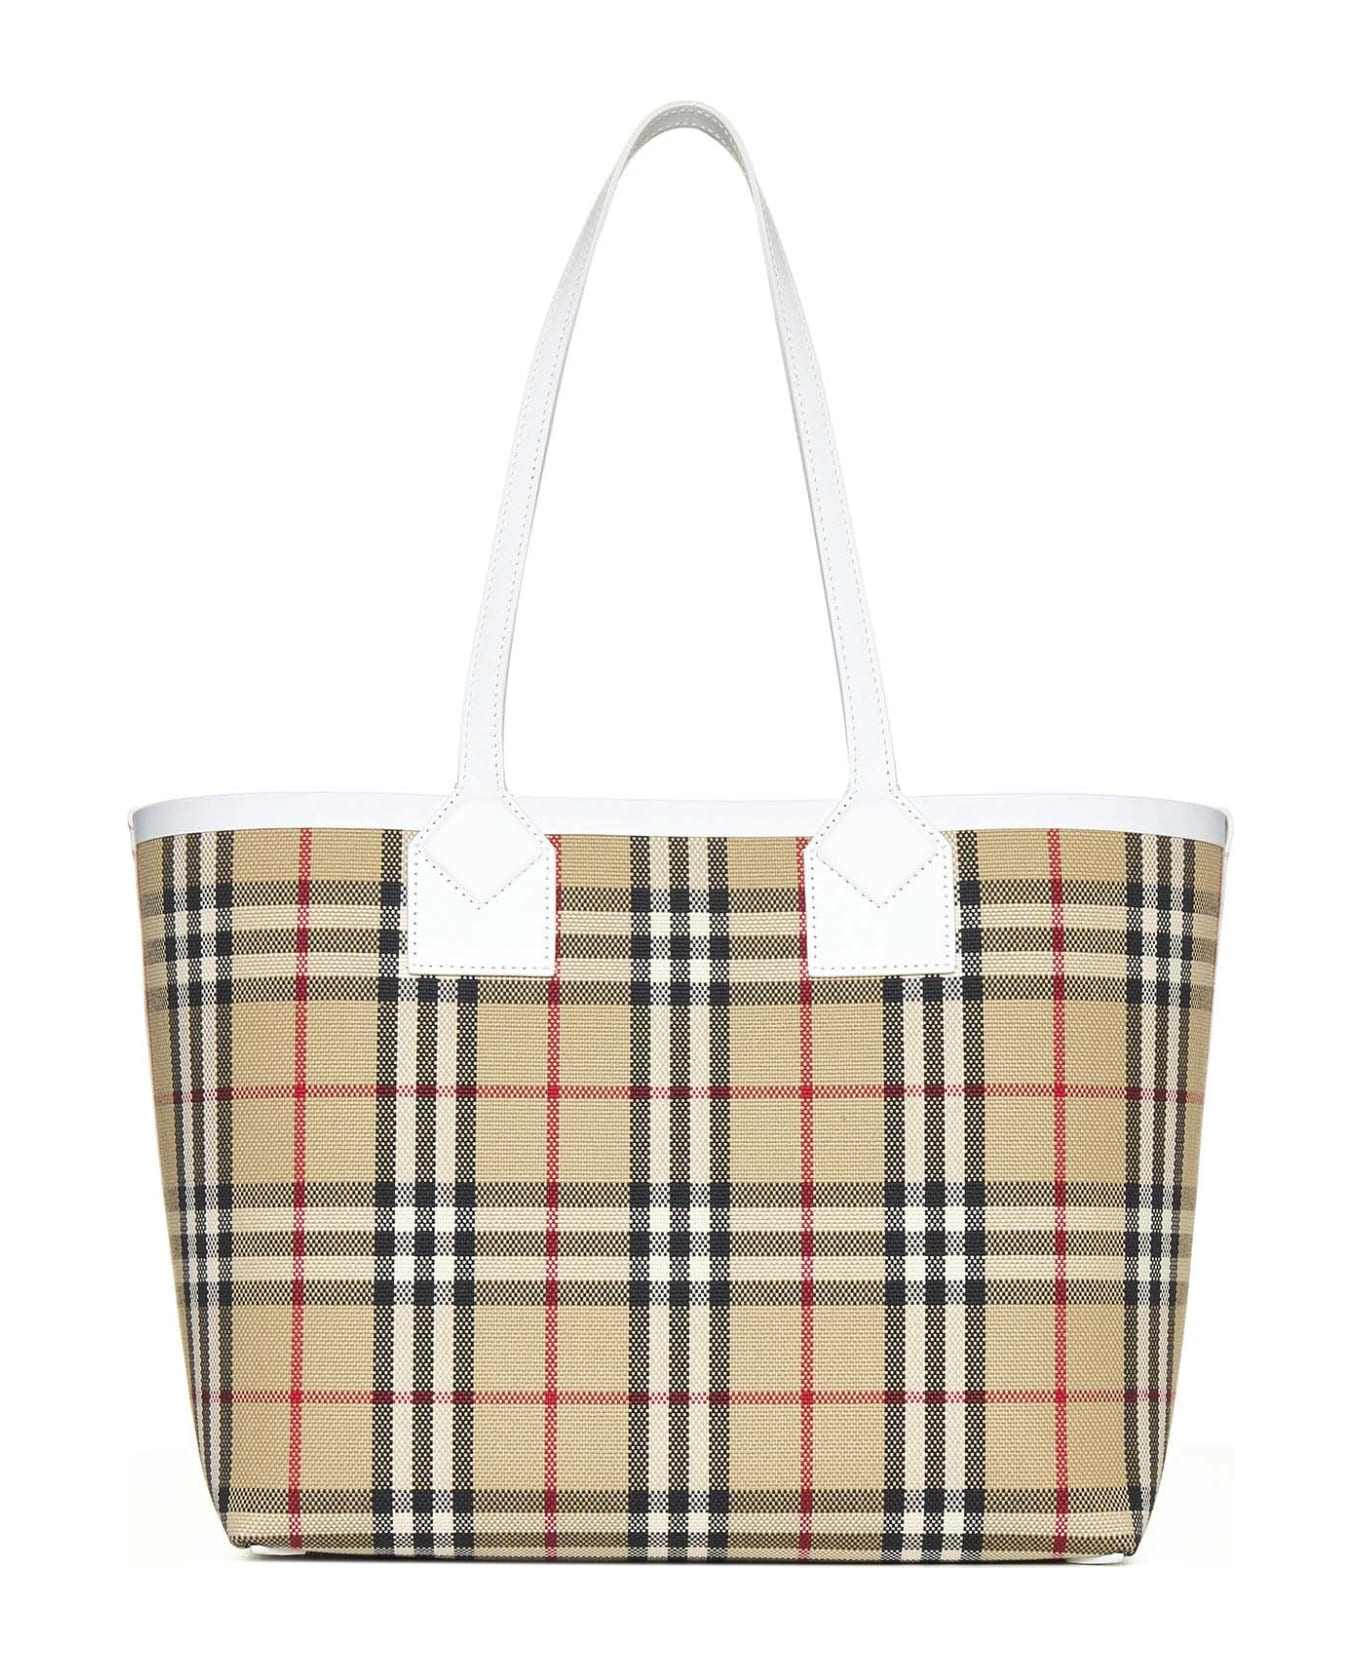 Burberry Small London Tote Bag - Vintage check/white トートバッグ